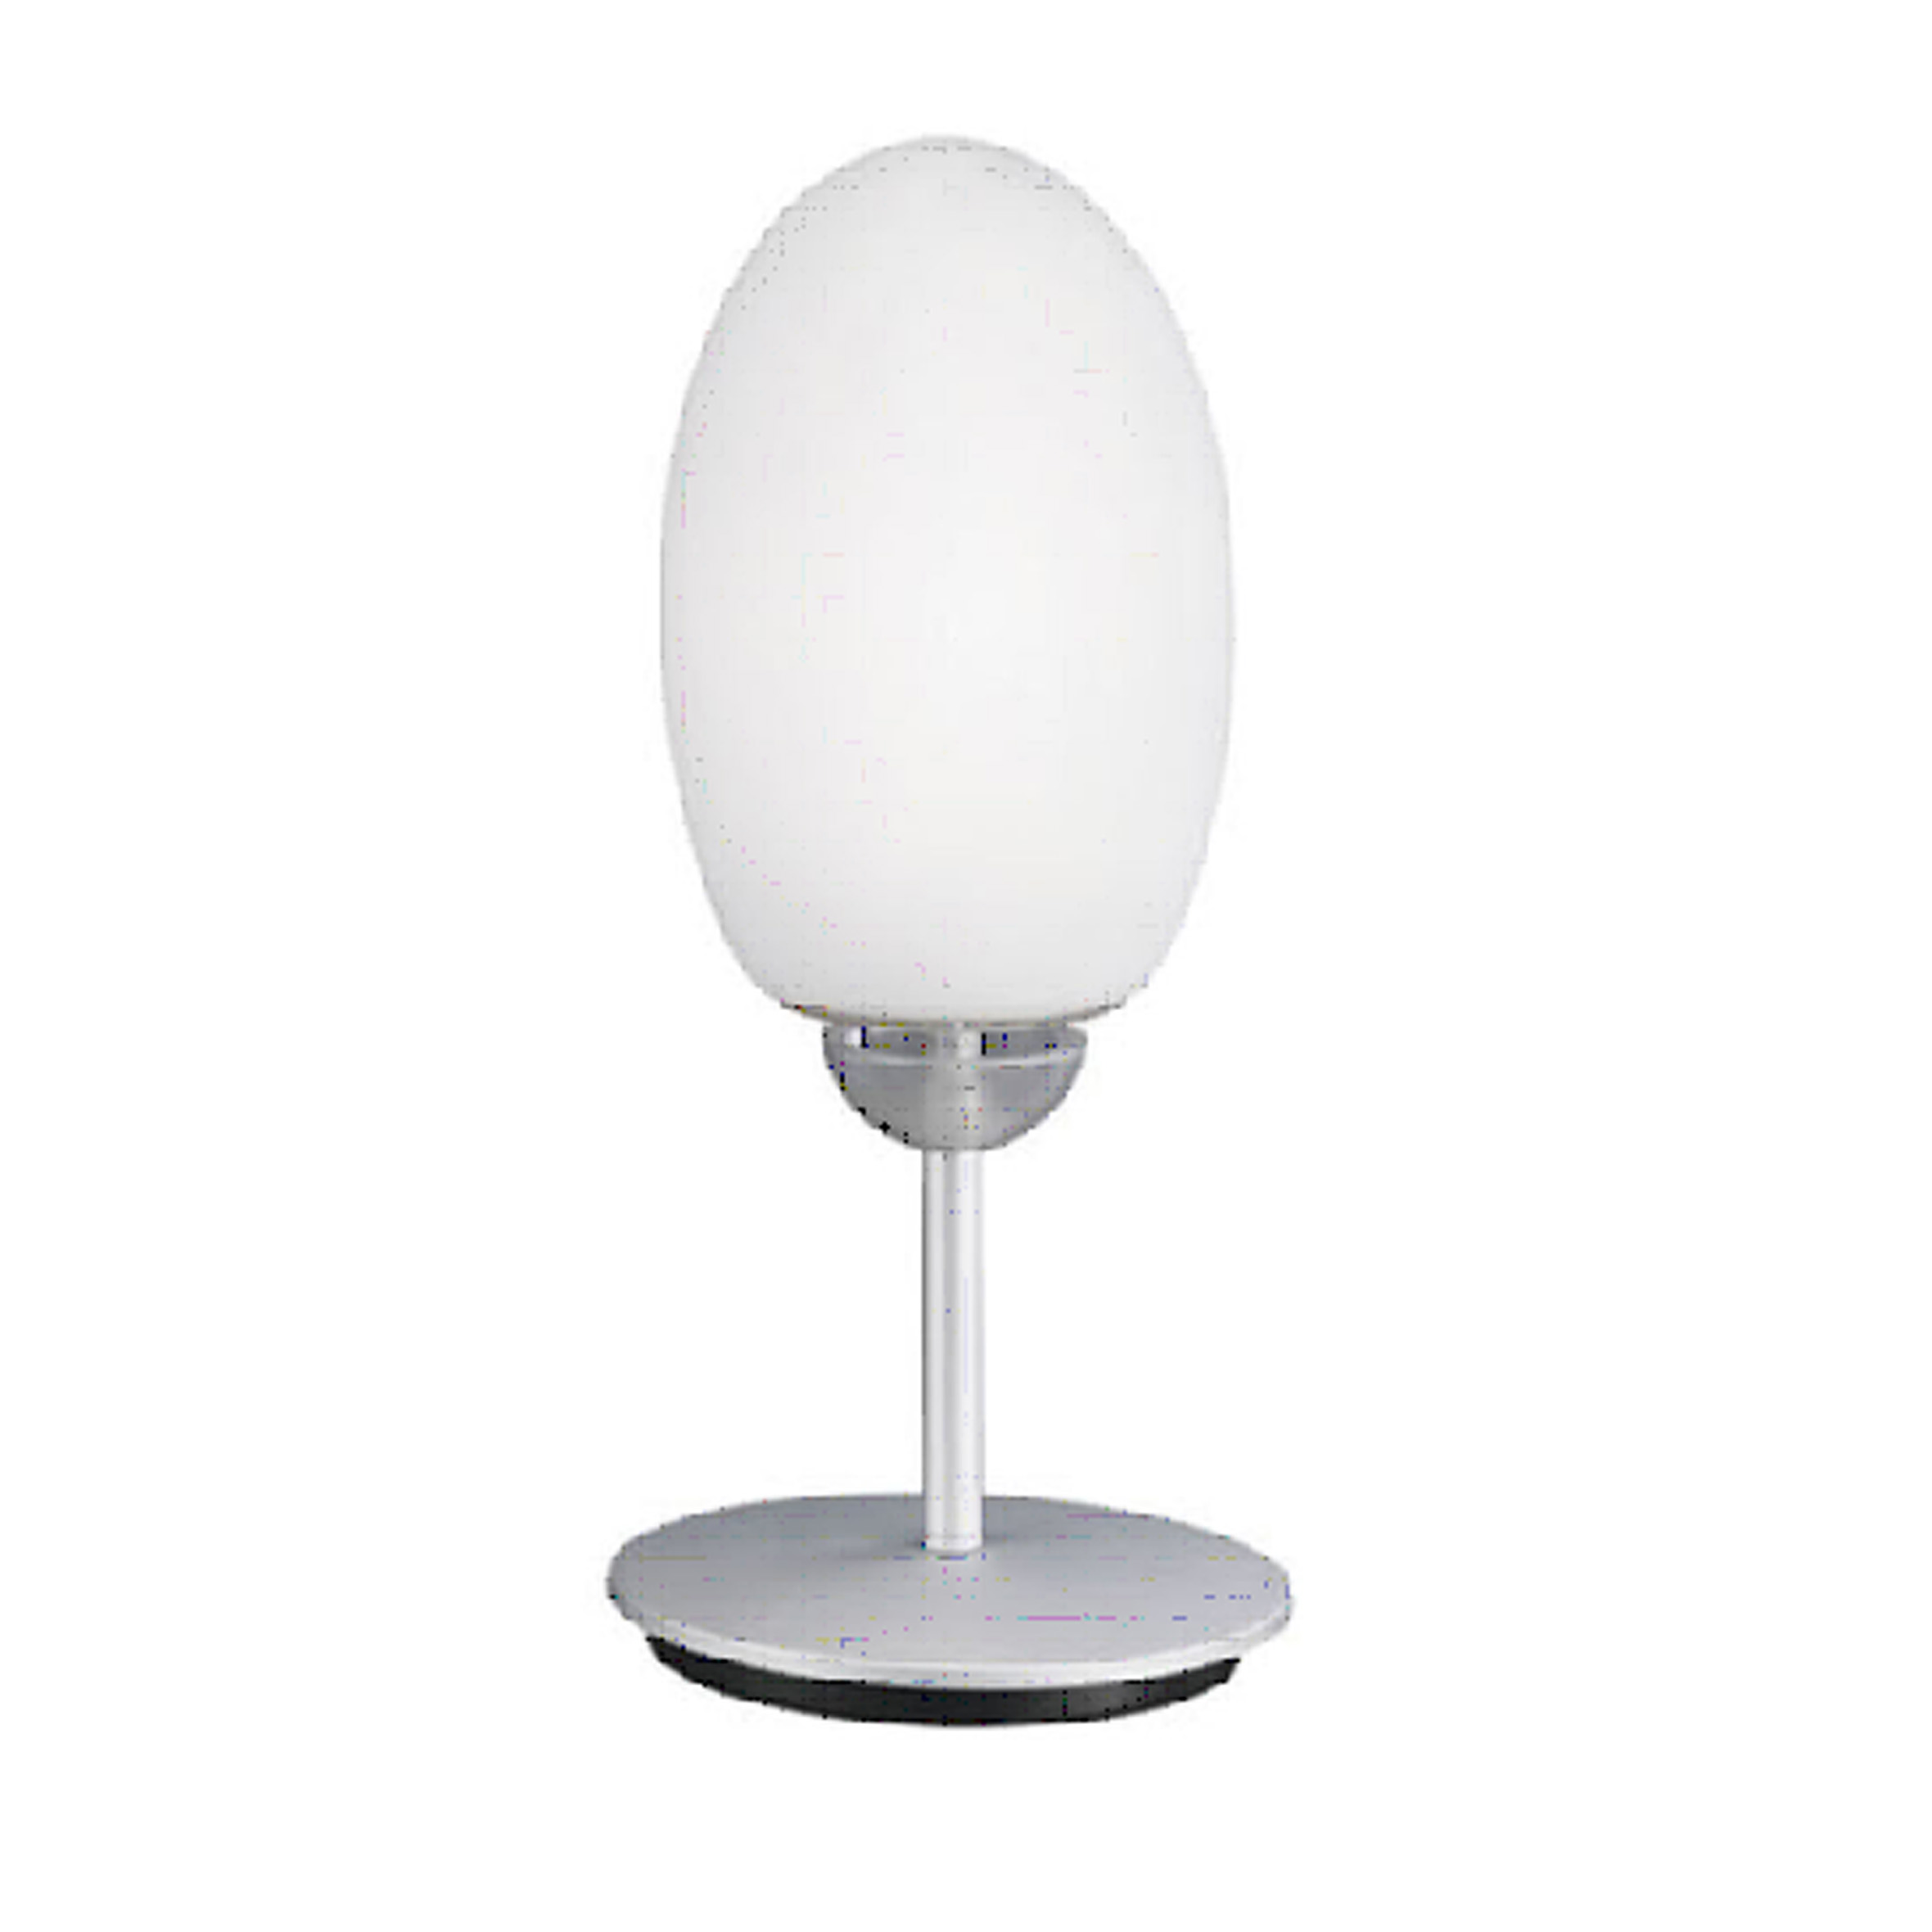 Living room decoration table lamp DT036-1.Item No.DT036             2.Living room decoration table lamp DT036            3.Modern home decoration           4.various sizes and colors